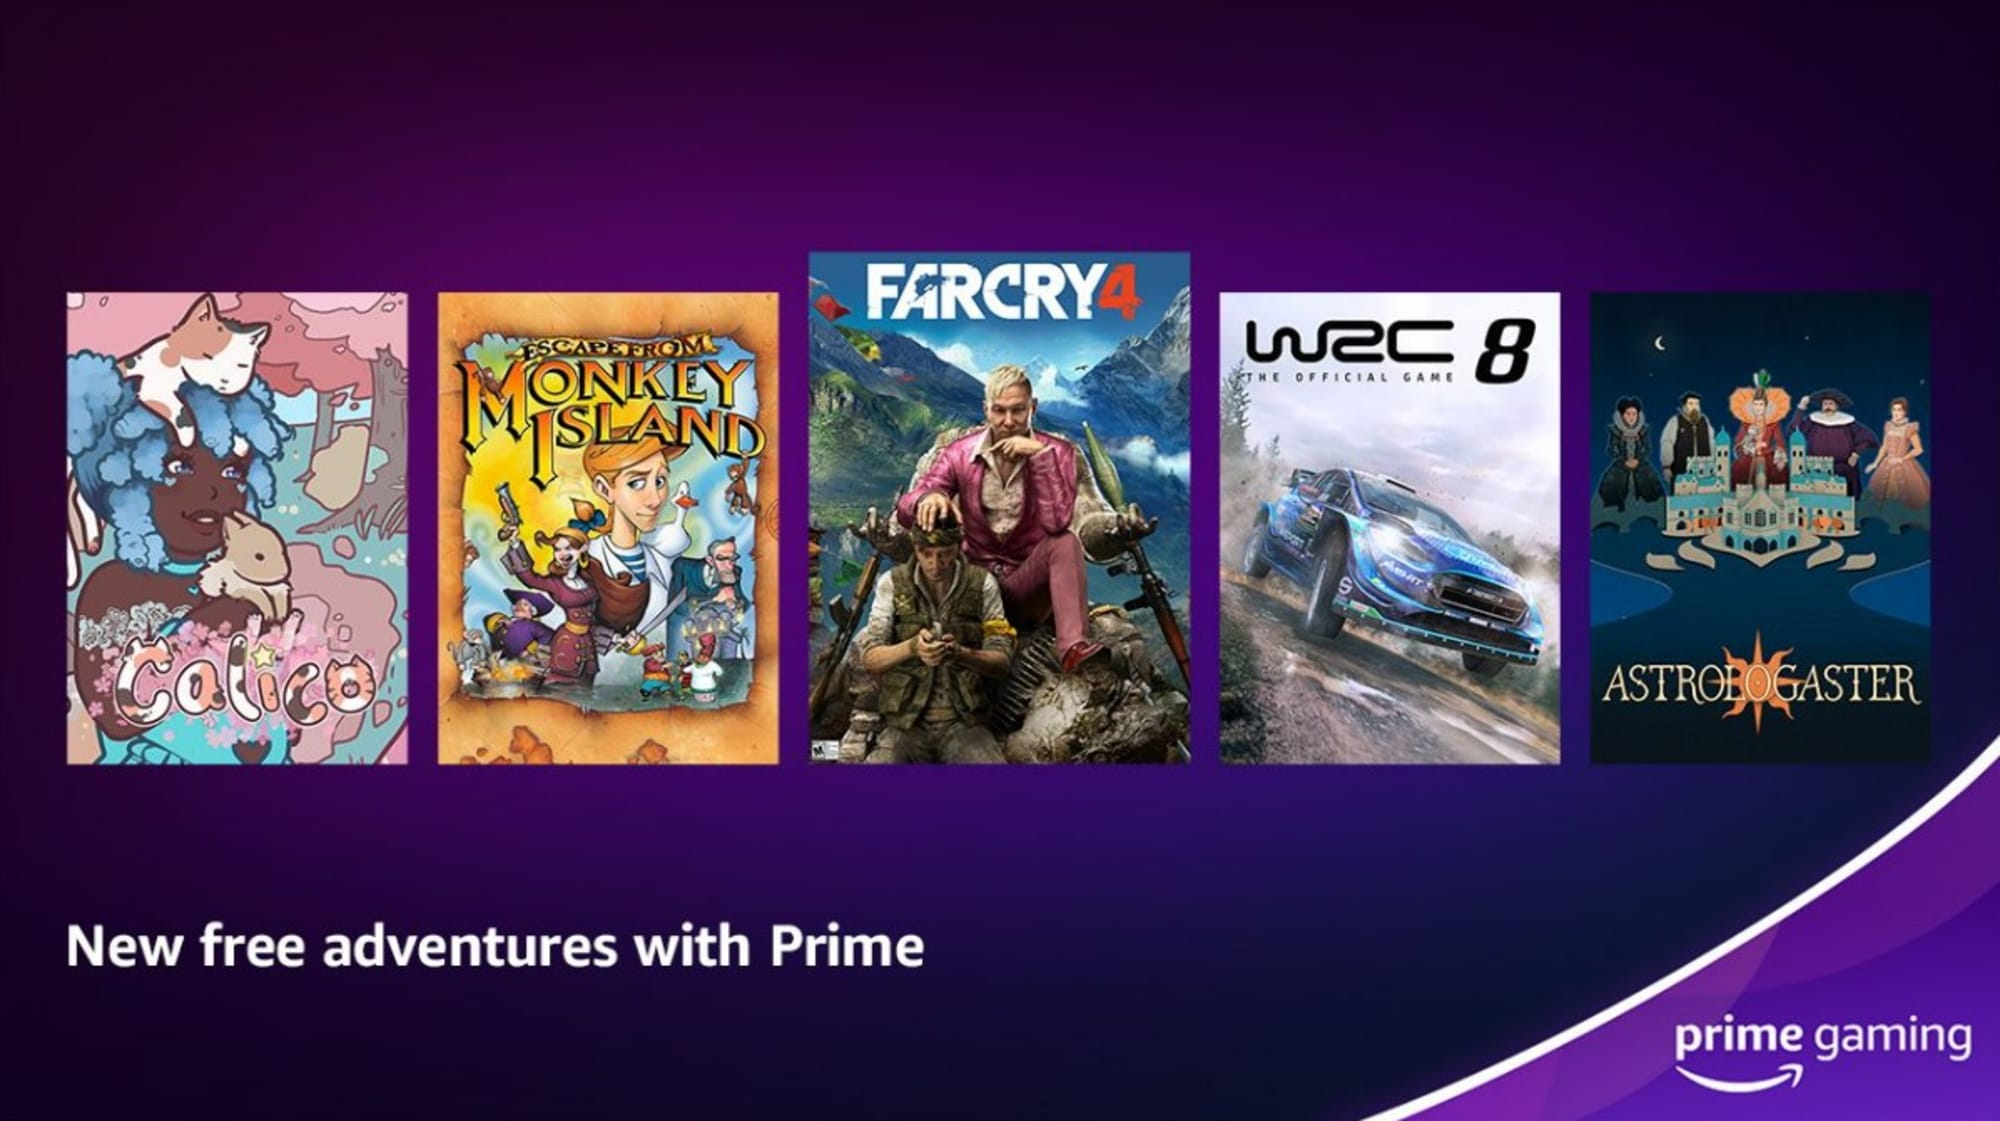 Prime Gaming content announced for April: Details